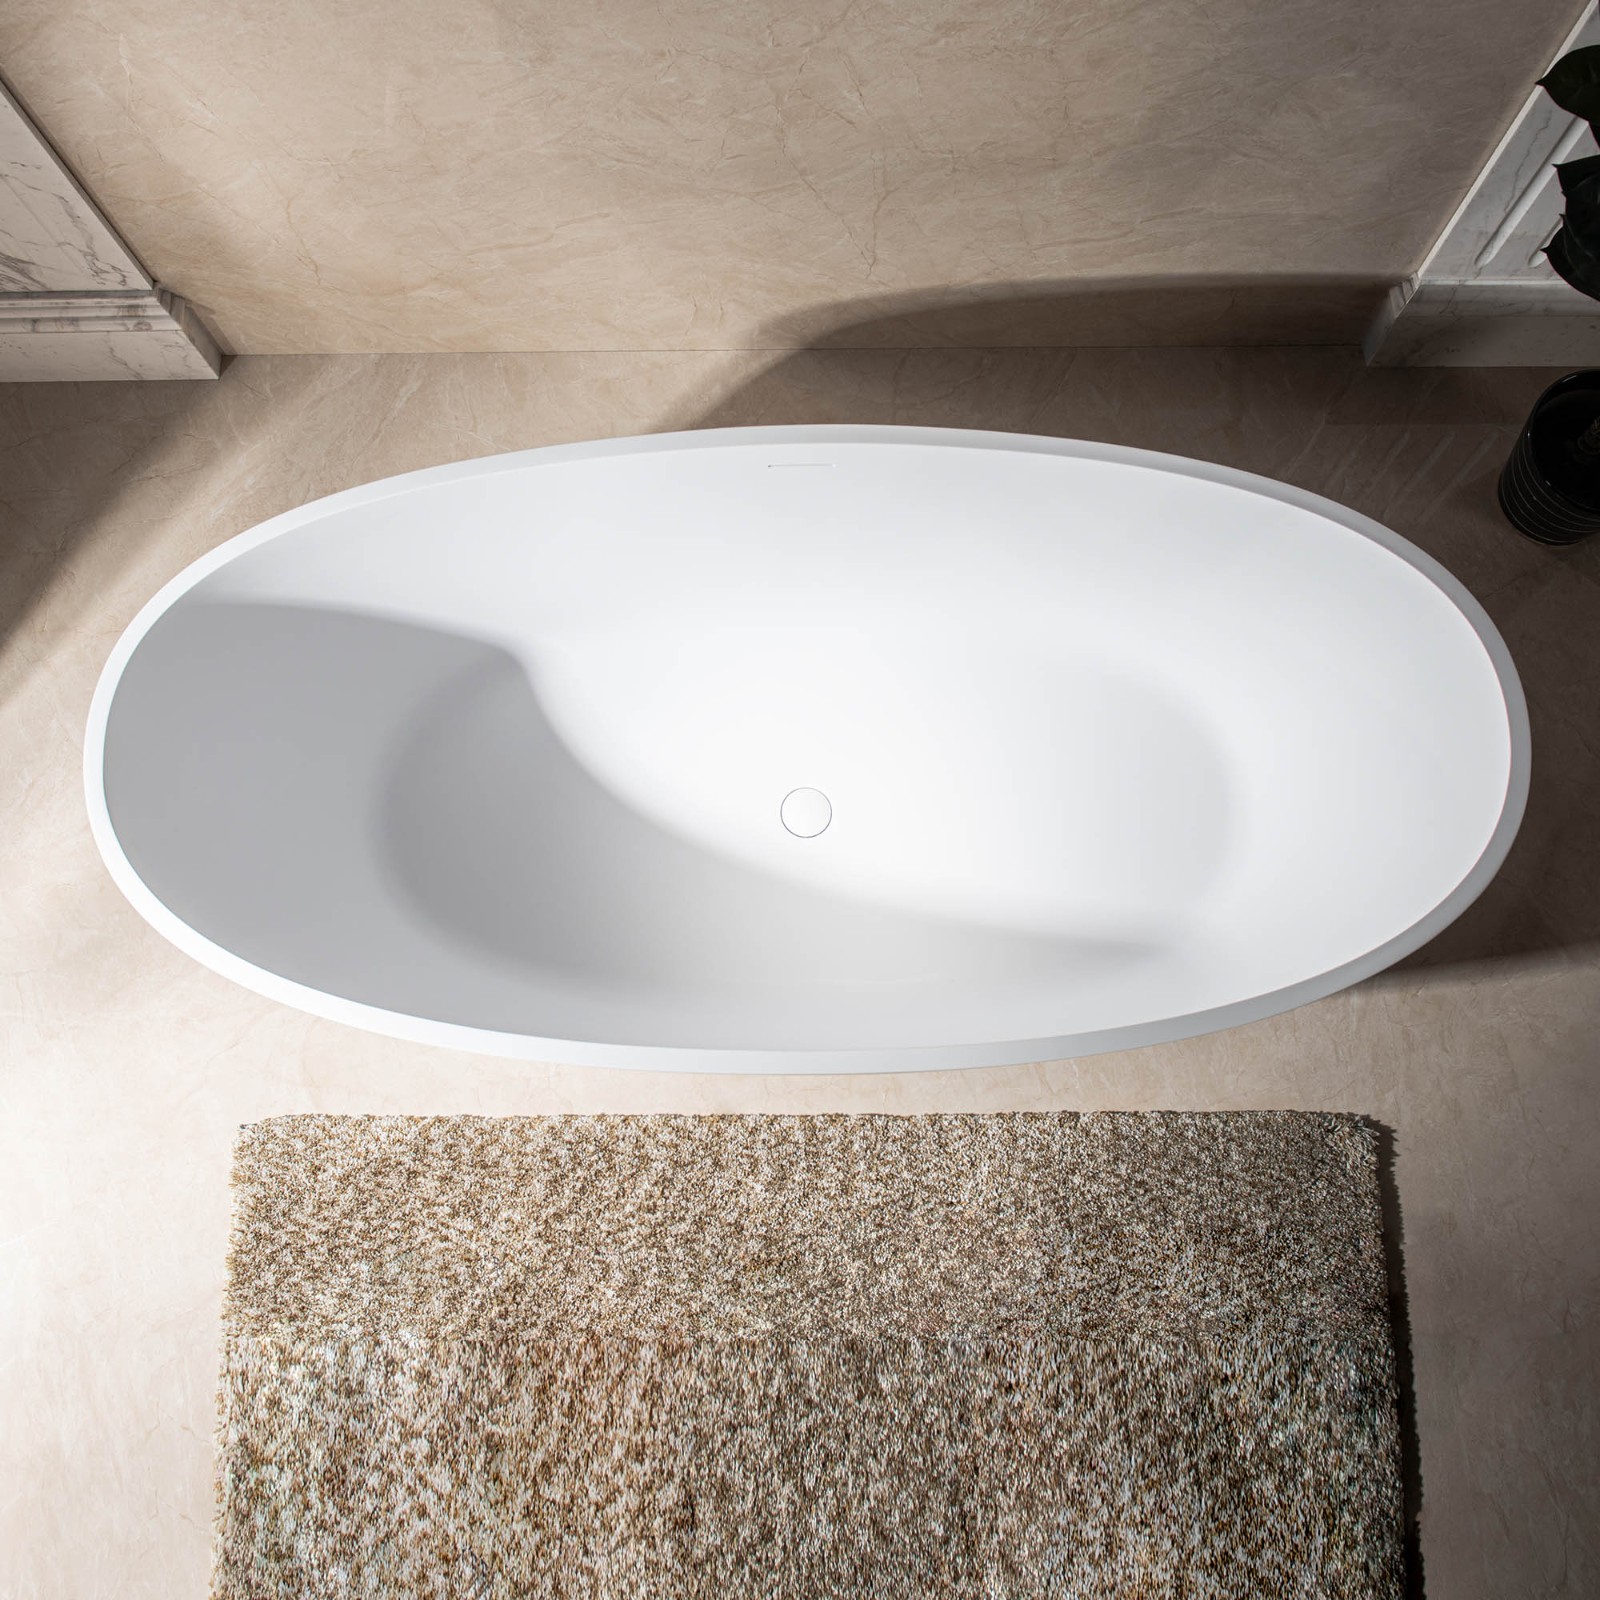  WOODBRIDGE 67 in. x 30.75 in. Luxury Contemporary Solid Surface Freestanding Bathtub in Matte White_598